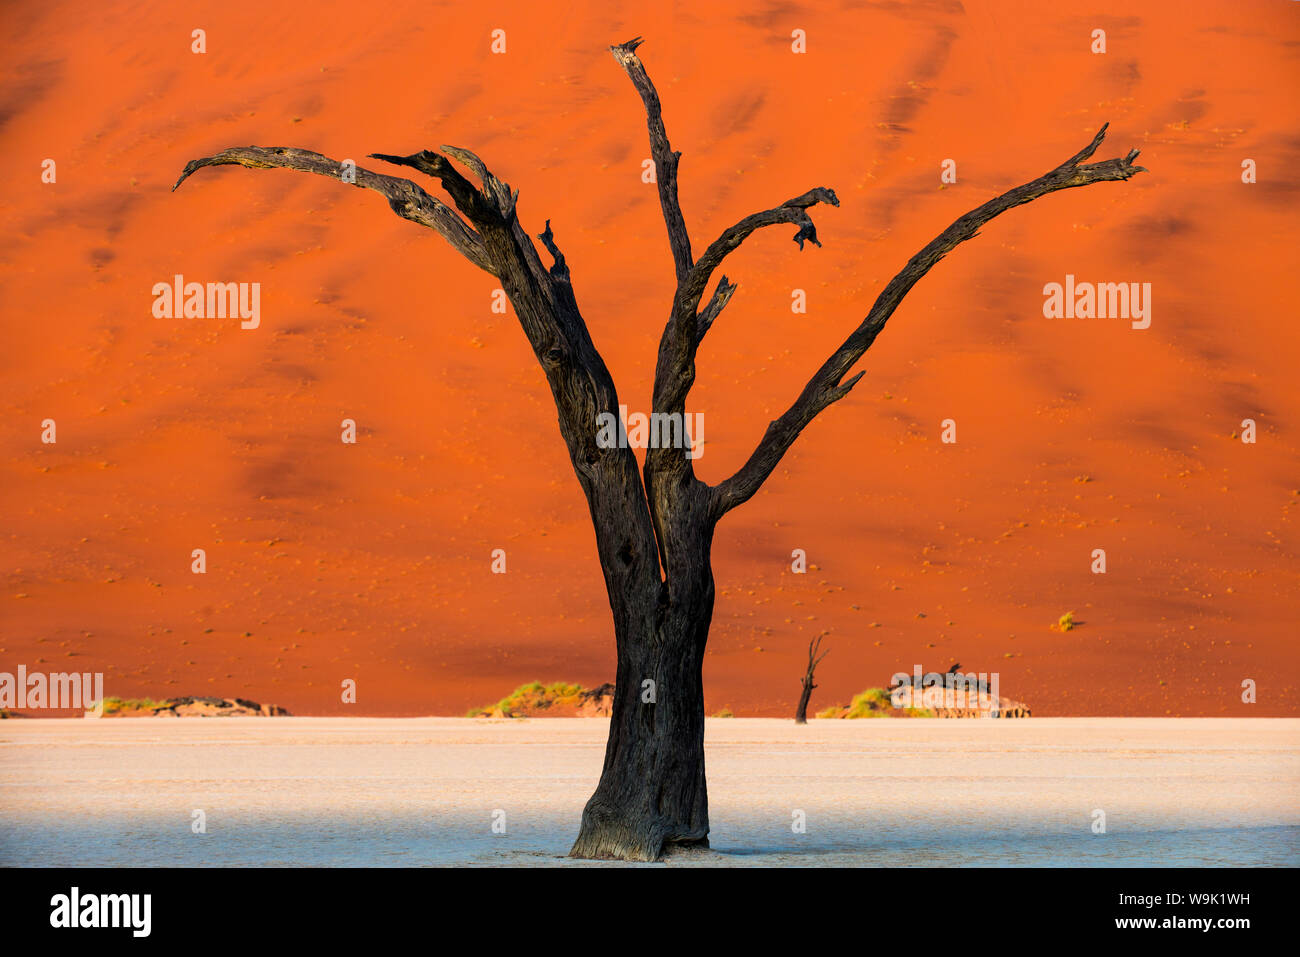 Dead acacia tree silhouetted against sand dunes at Deadvlei, Namib-Naukluft Park, Namibia, Africa Stock Photo